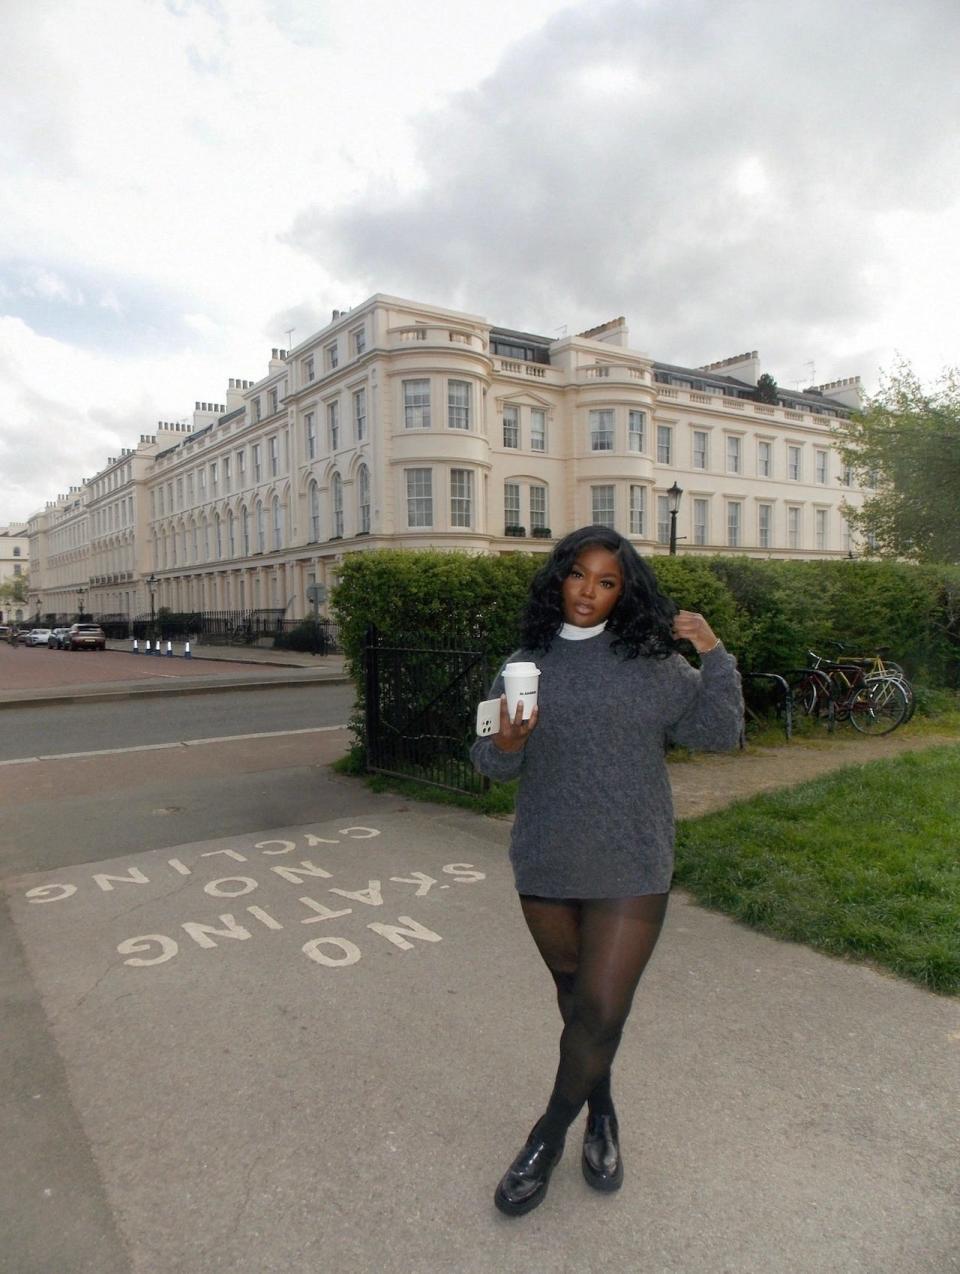 Nkengasong in a blue-gray sweater holding a coffee cup and her cell phone in front of a building and hedges in London.